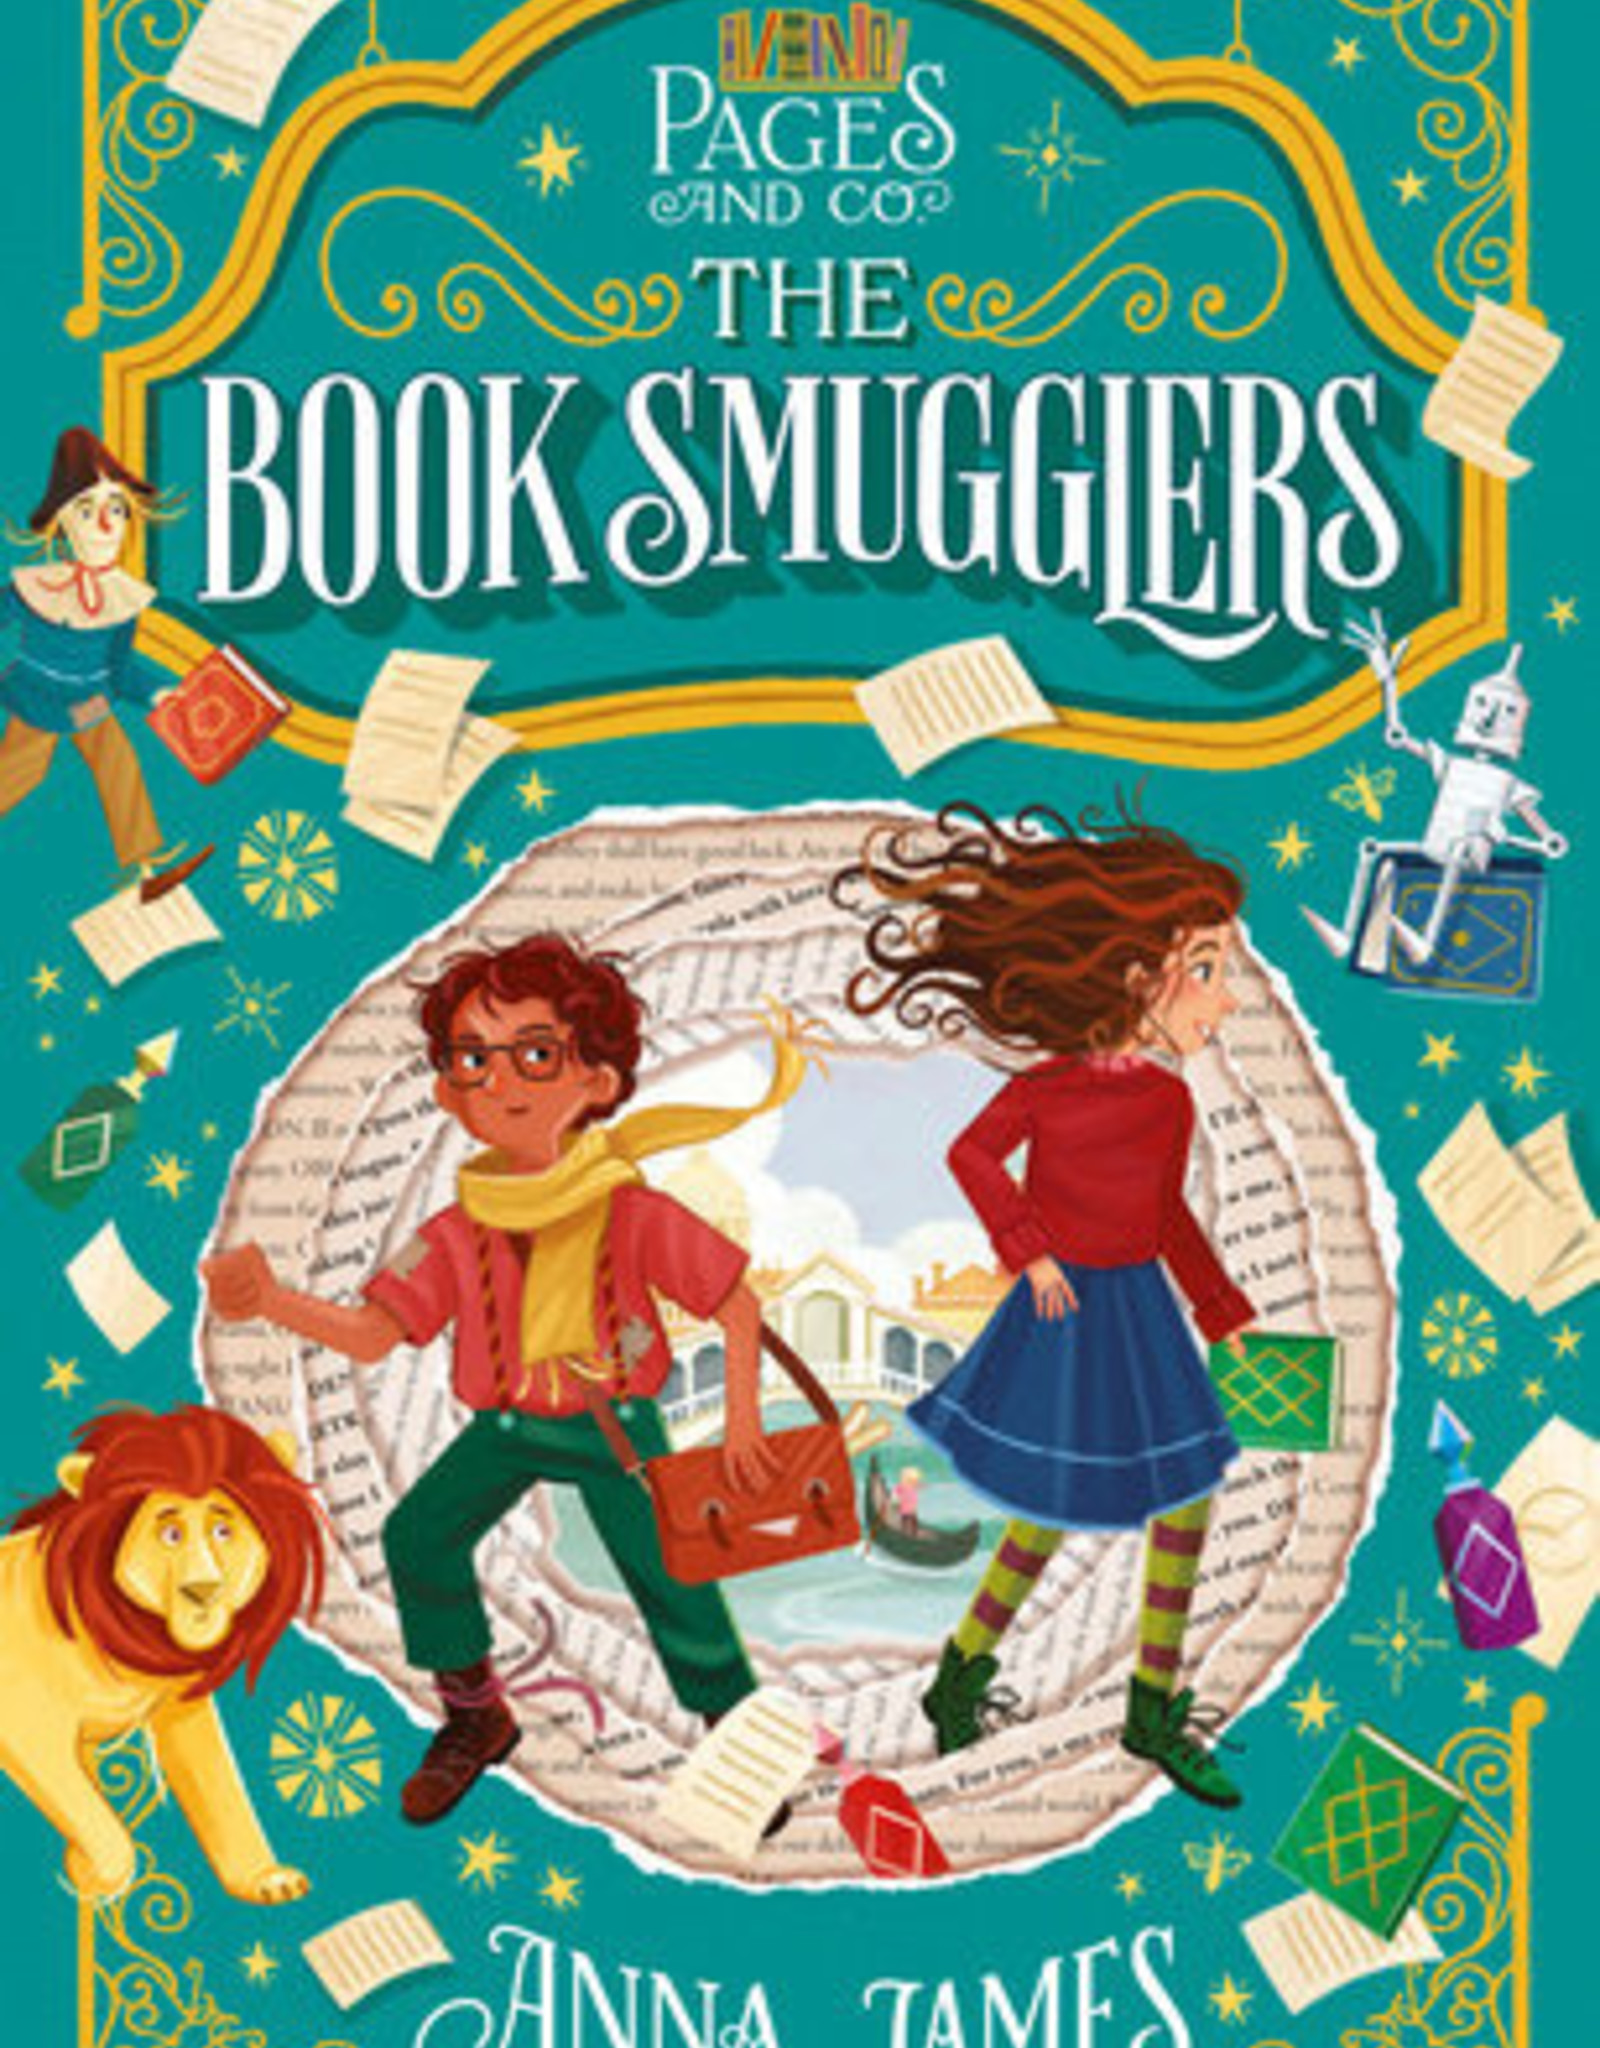 Random House/Penguin Pages & Co.: The Book Smugglers